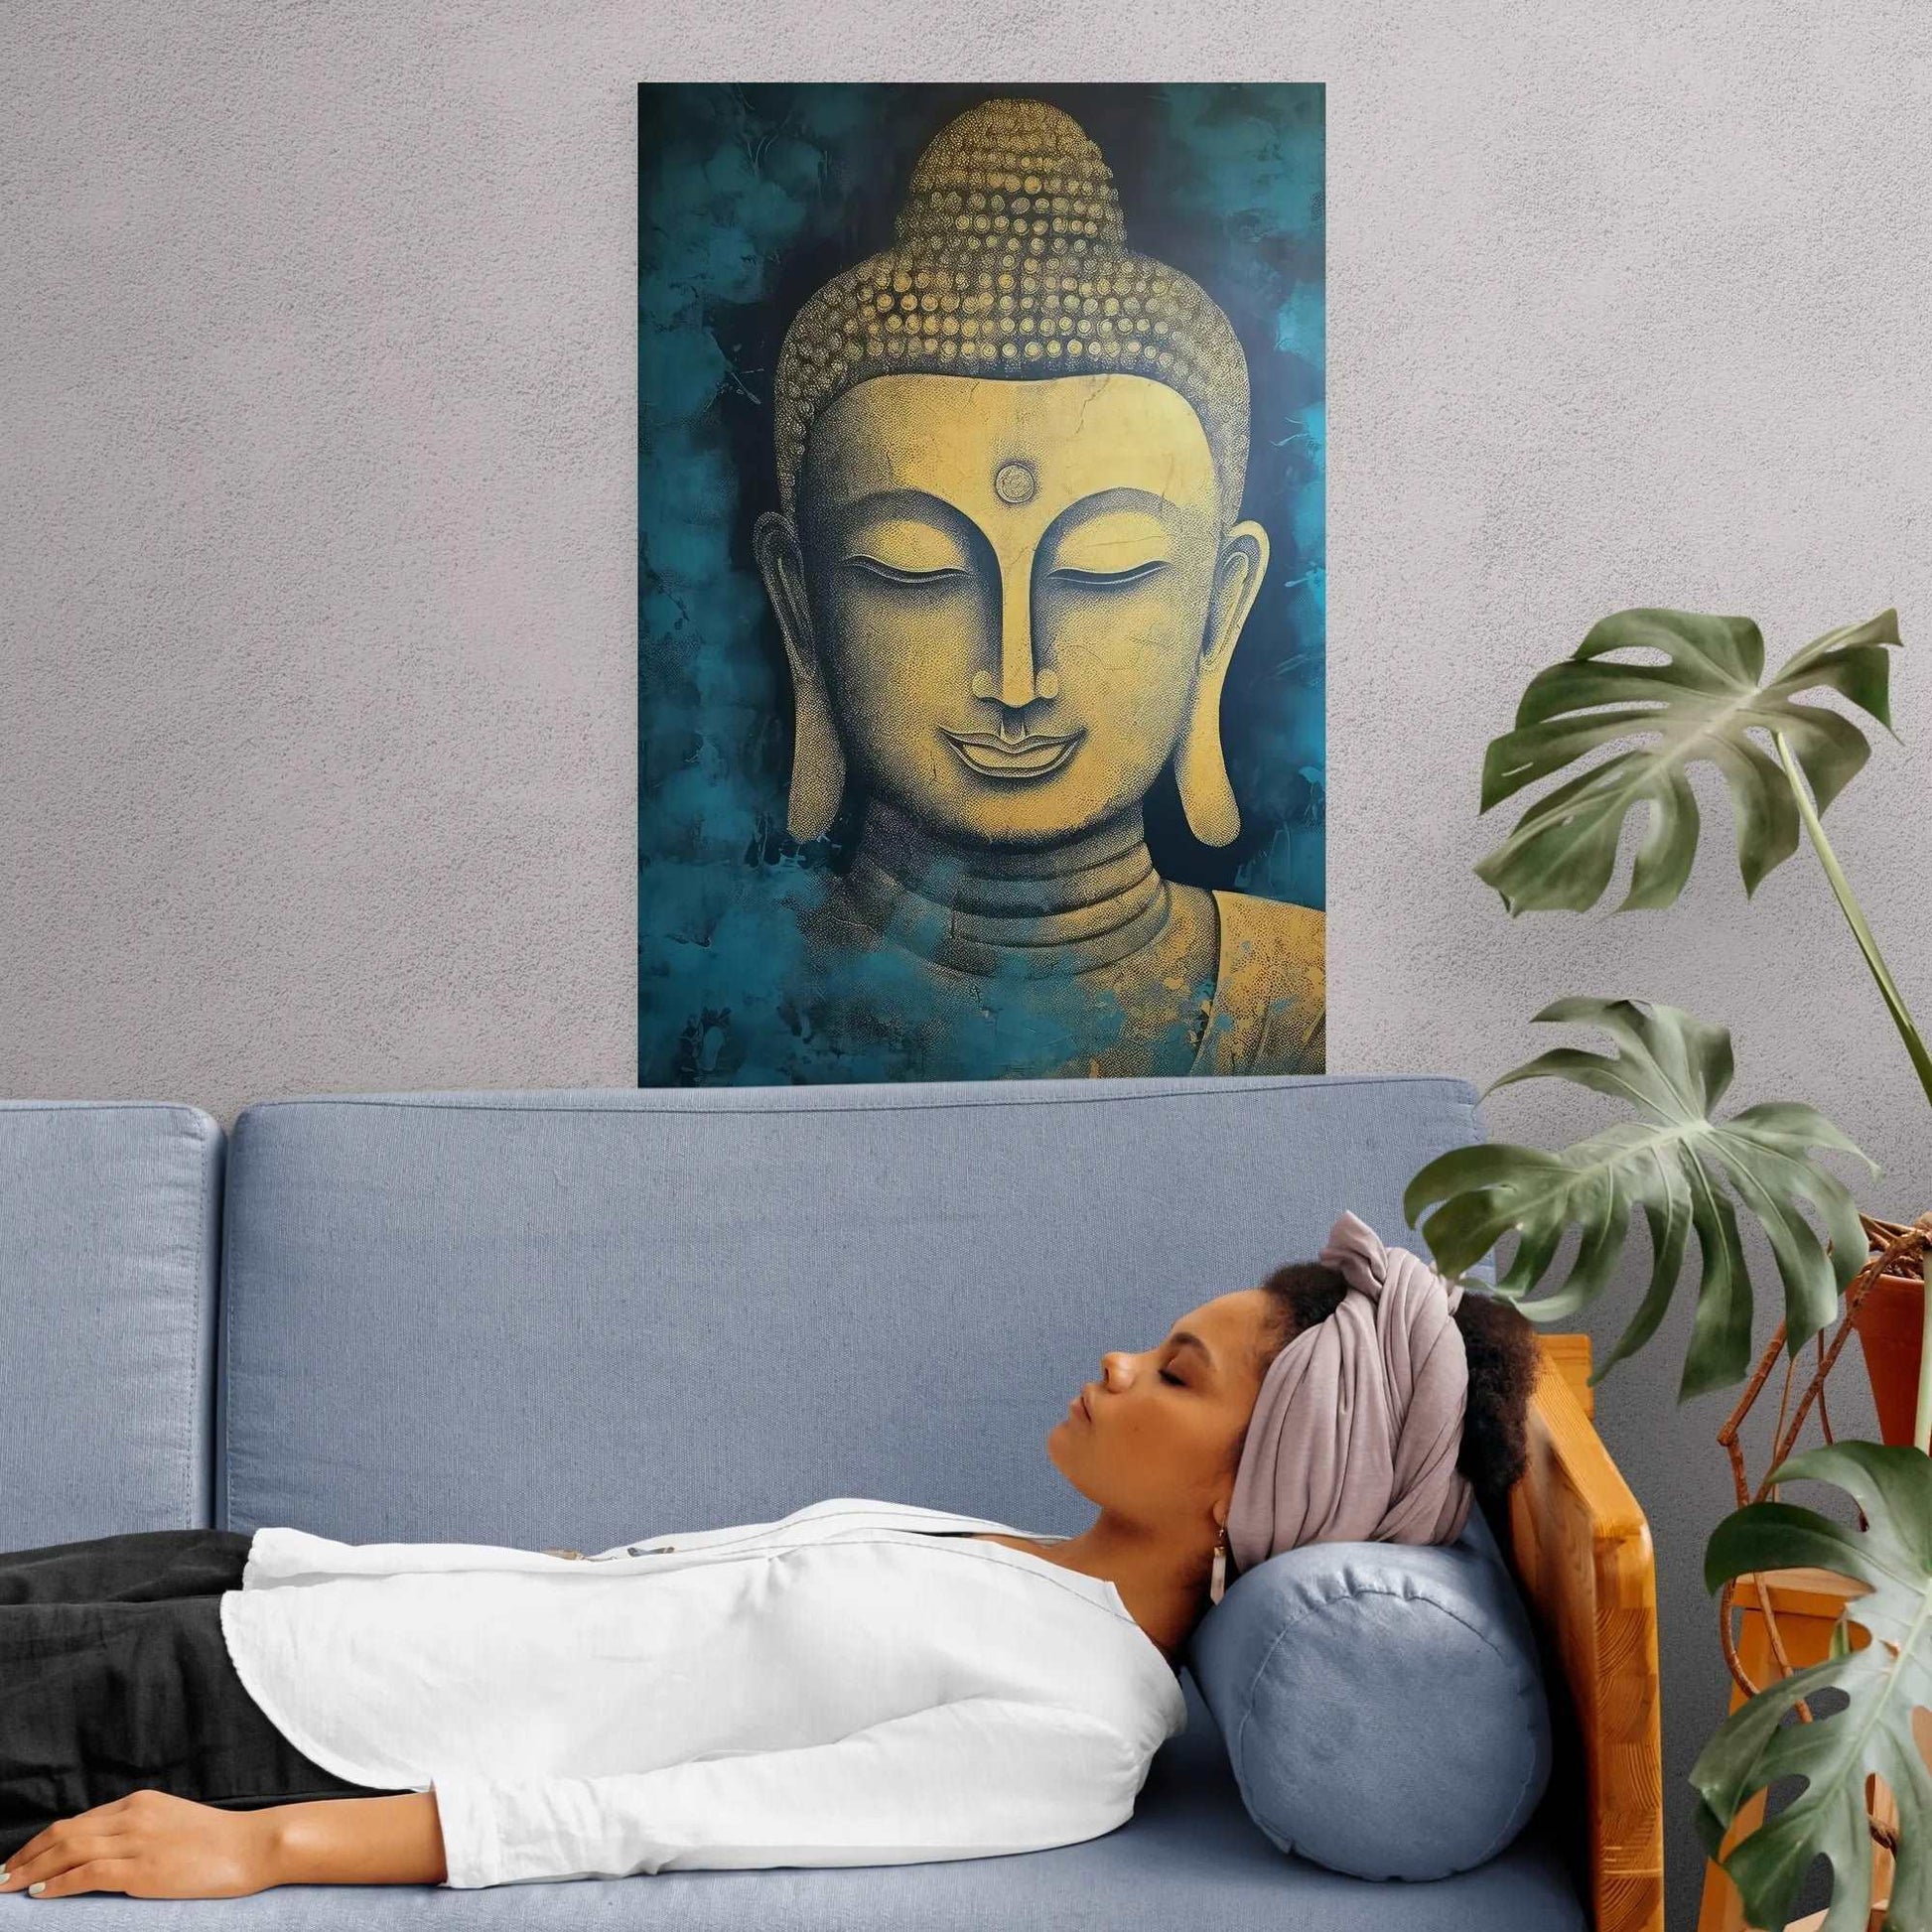 Woman lying on a blue couch with her head resting on a round pillow, underneath a golden Buddha head wall art, next to a monstera plant.